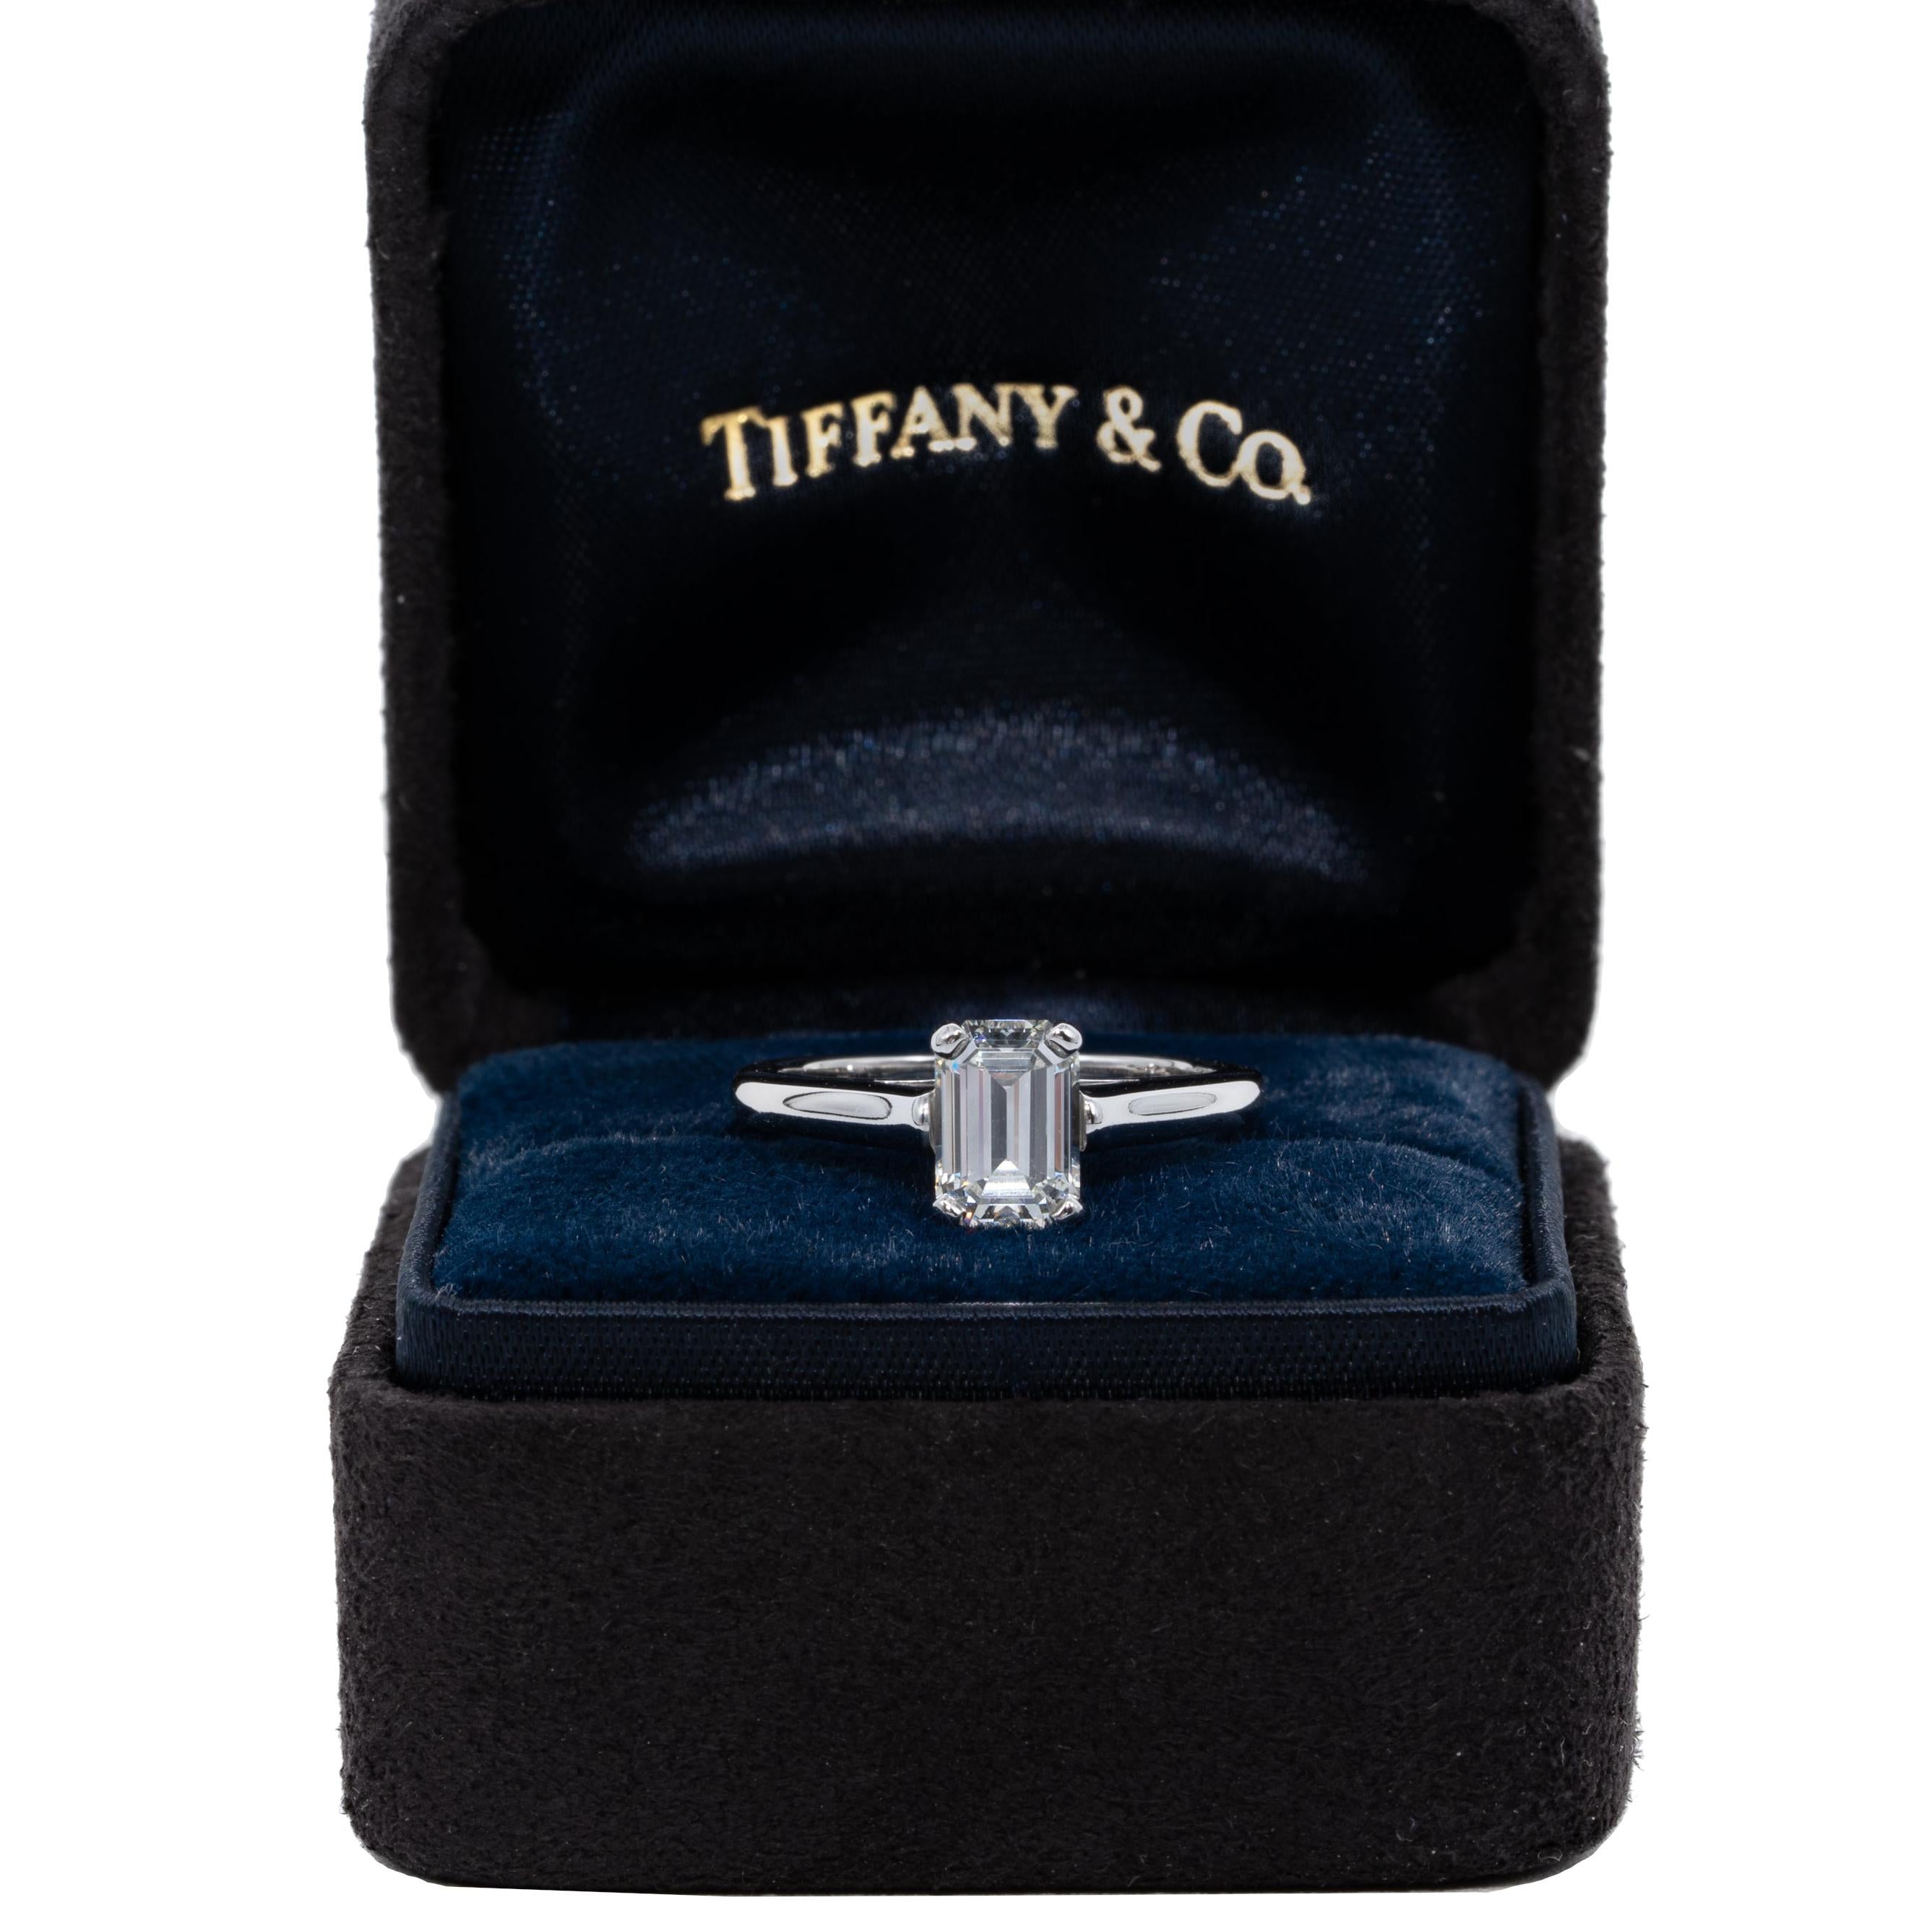 Tiffany & Co. Engagement Ring with 1.07 Carat Emerald Cut Centre in Platinum